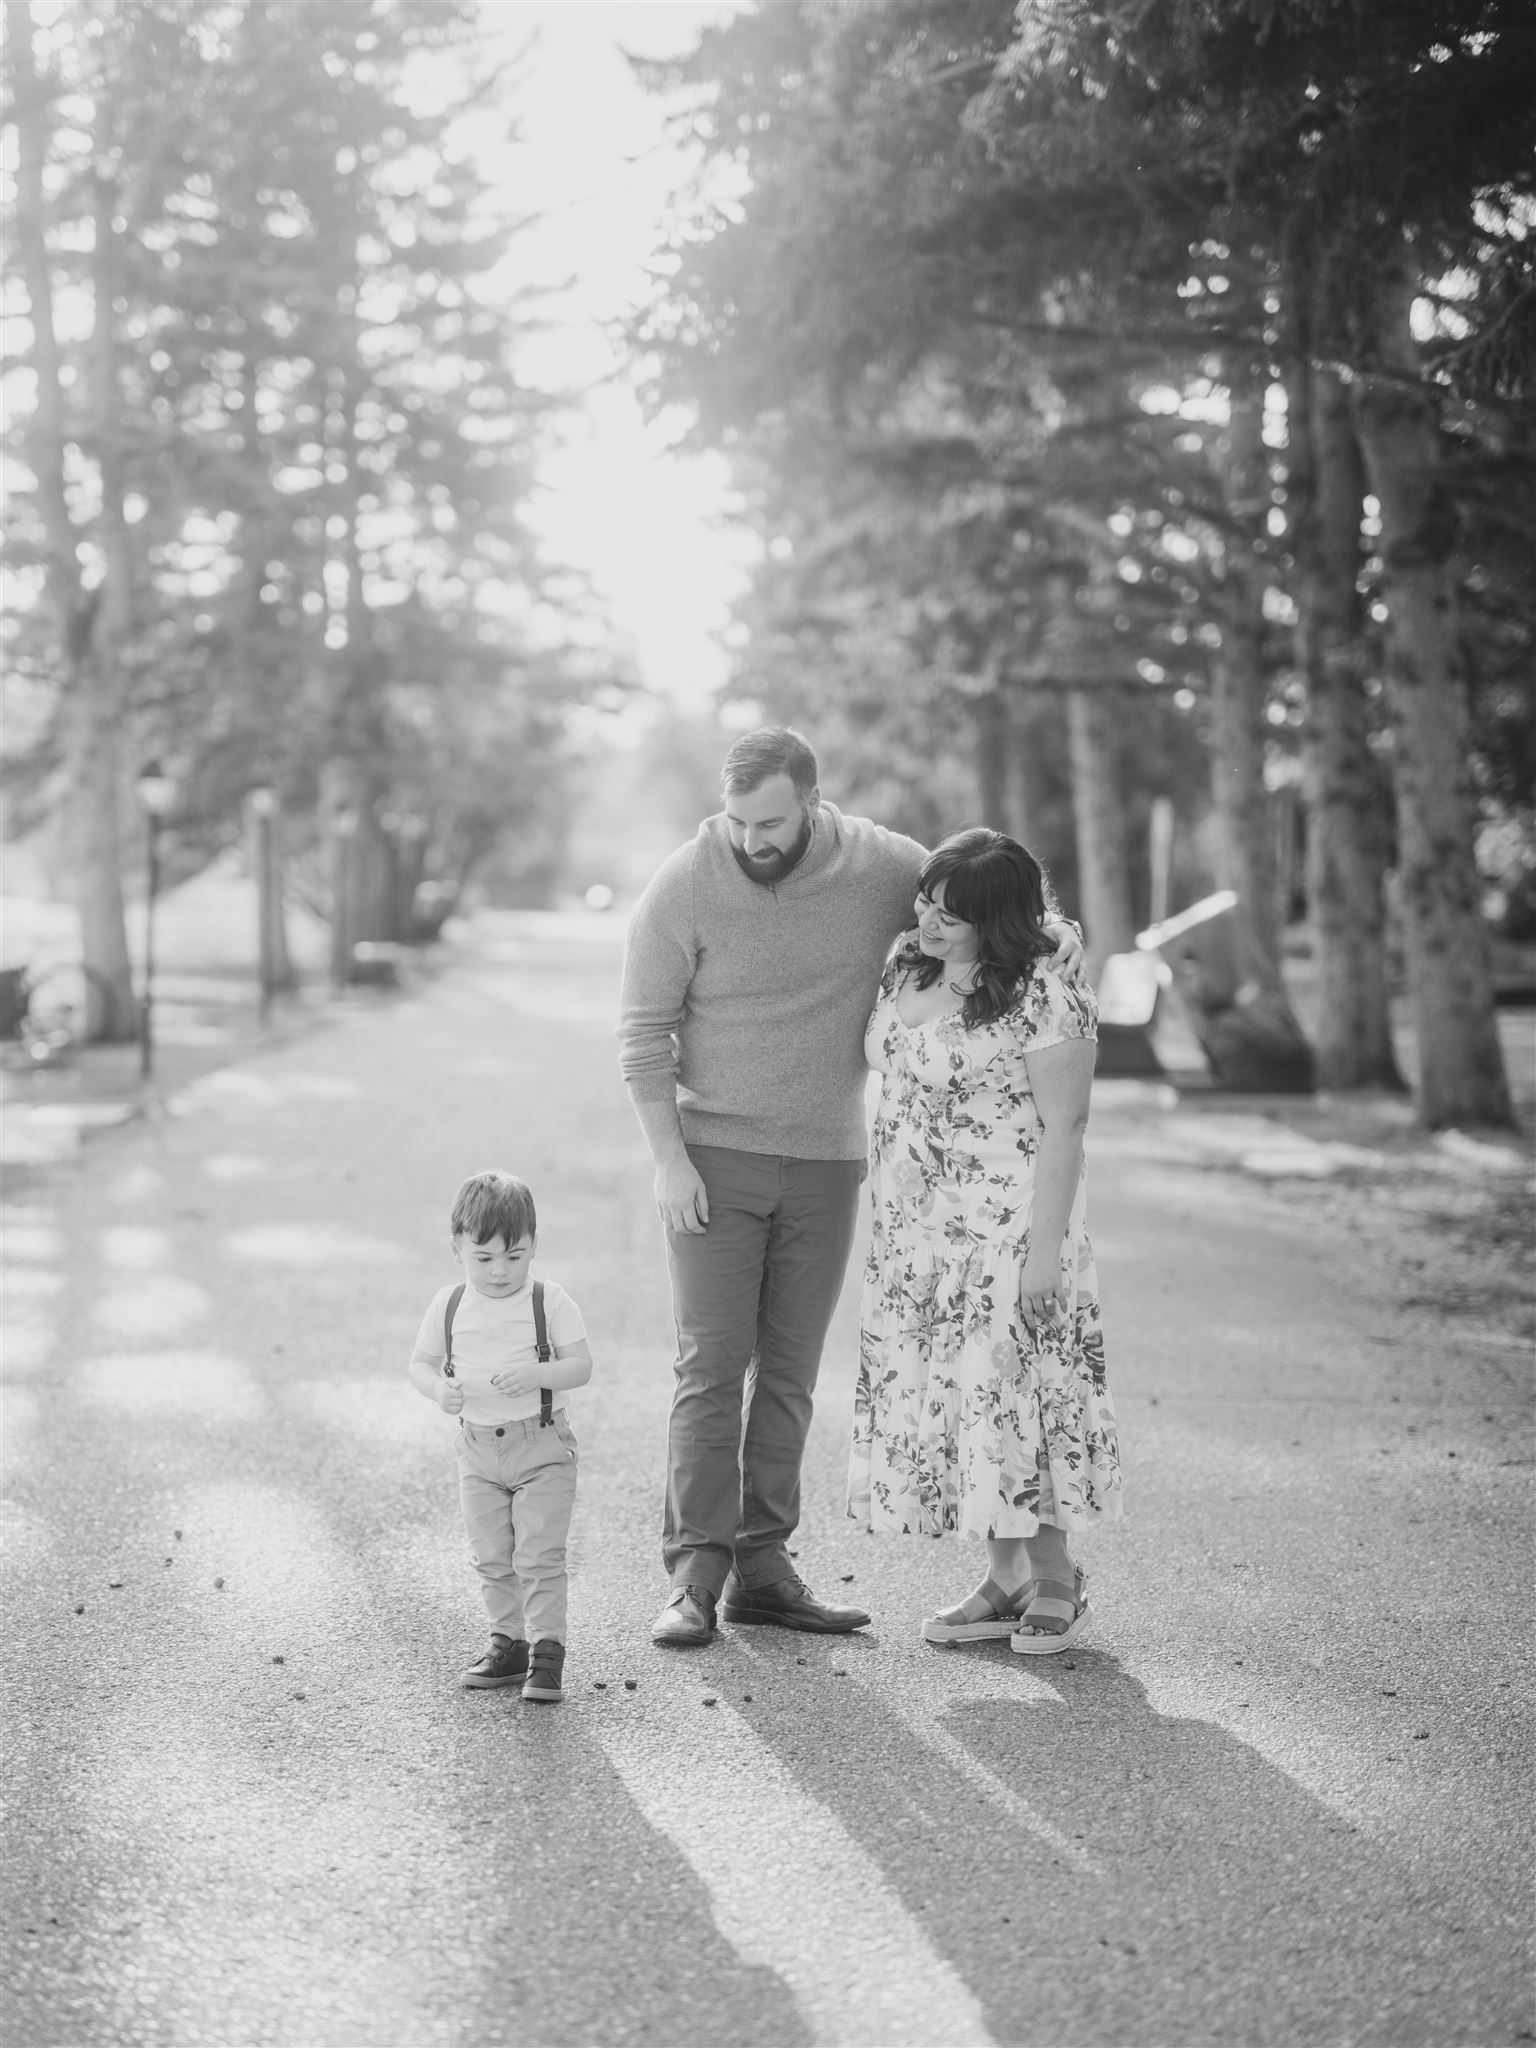 Bow Valley Fall Family Photographer Nicole Sarah, family photos calgary, fall family photo outfits, family photo inspiration, fall wardrobe photos, family smiling fall photos, affordable family photos, fall minis, mom and dad holding toddler, family photo poses